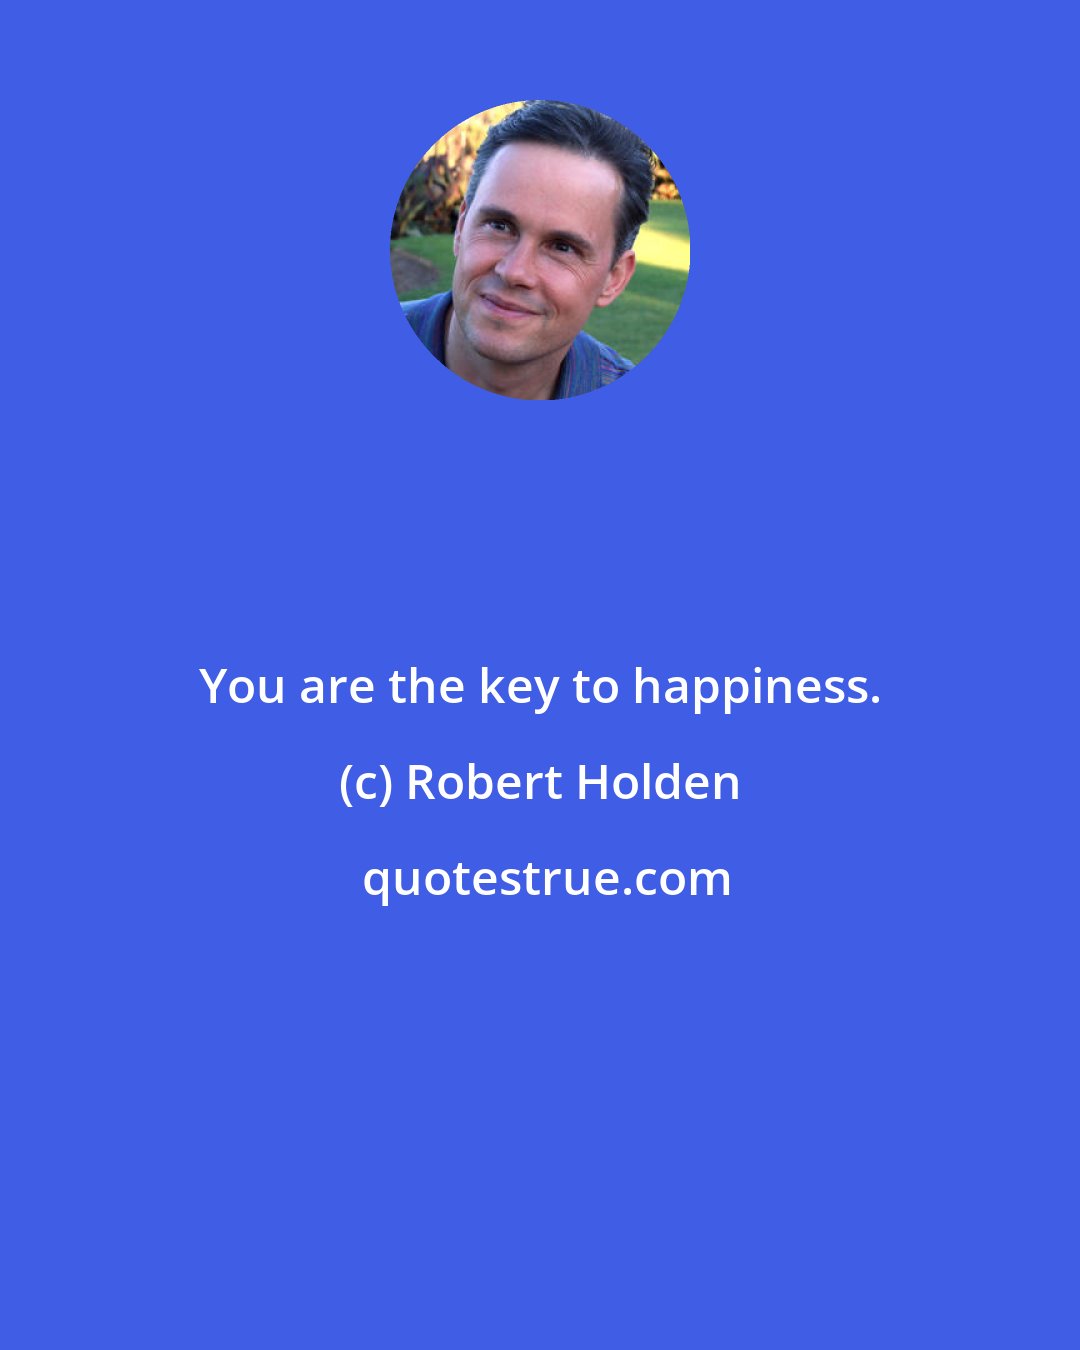 Robert Holden: You are the key to happiness.